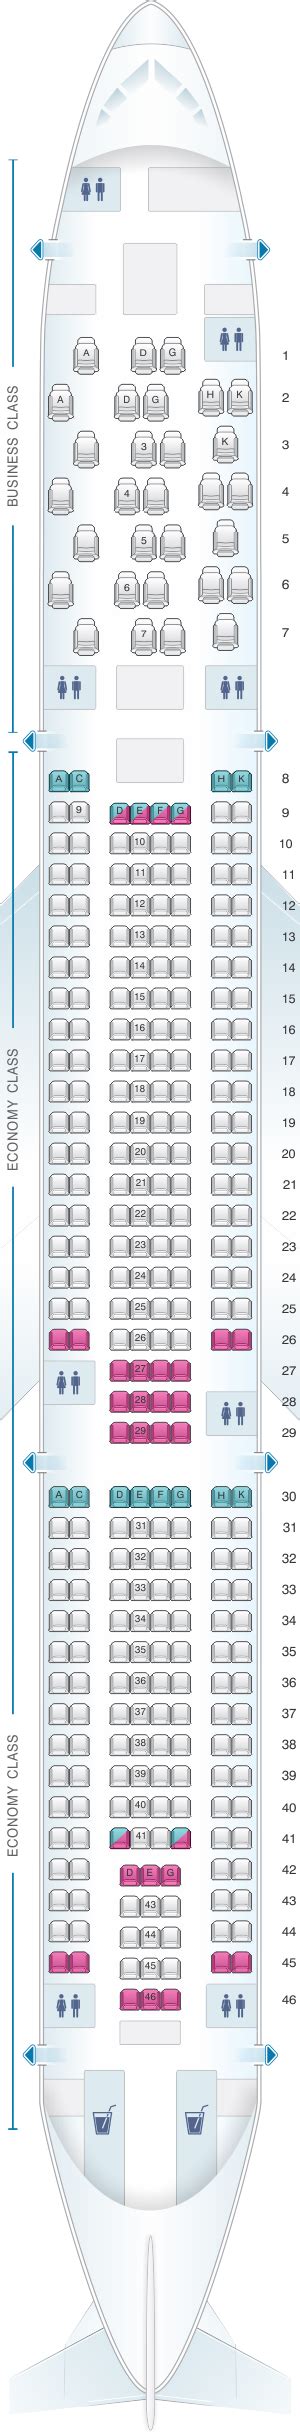 Airbus A333 Seating Chart